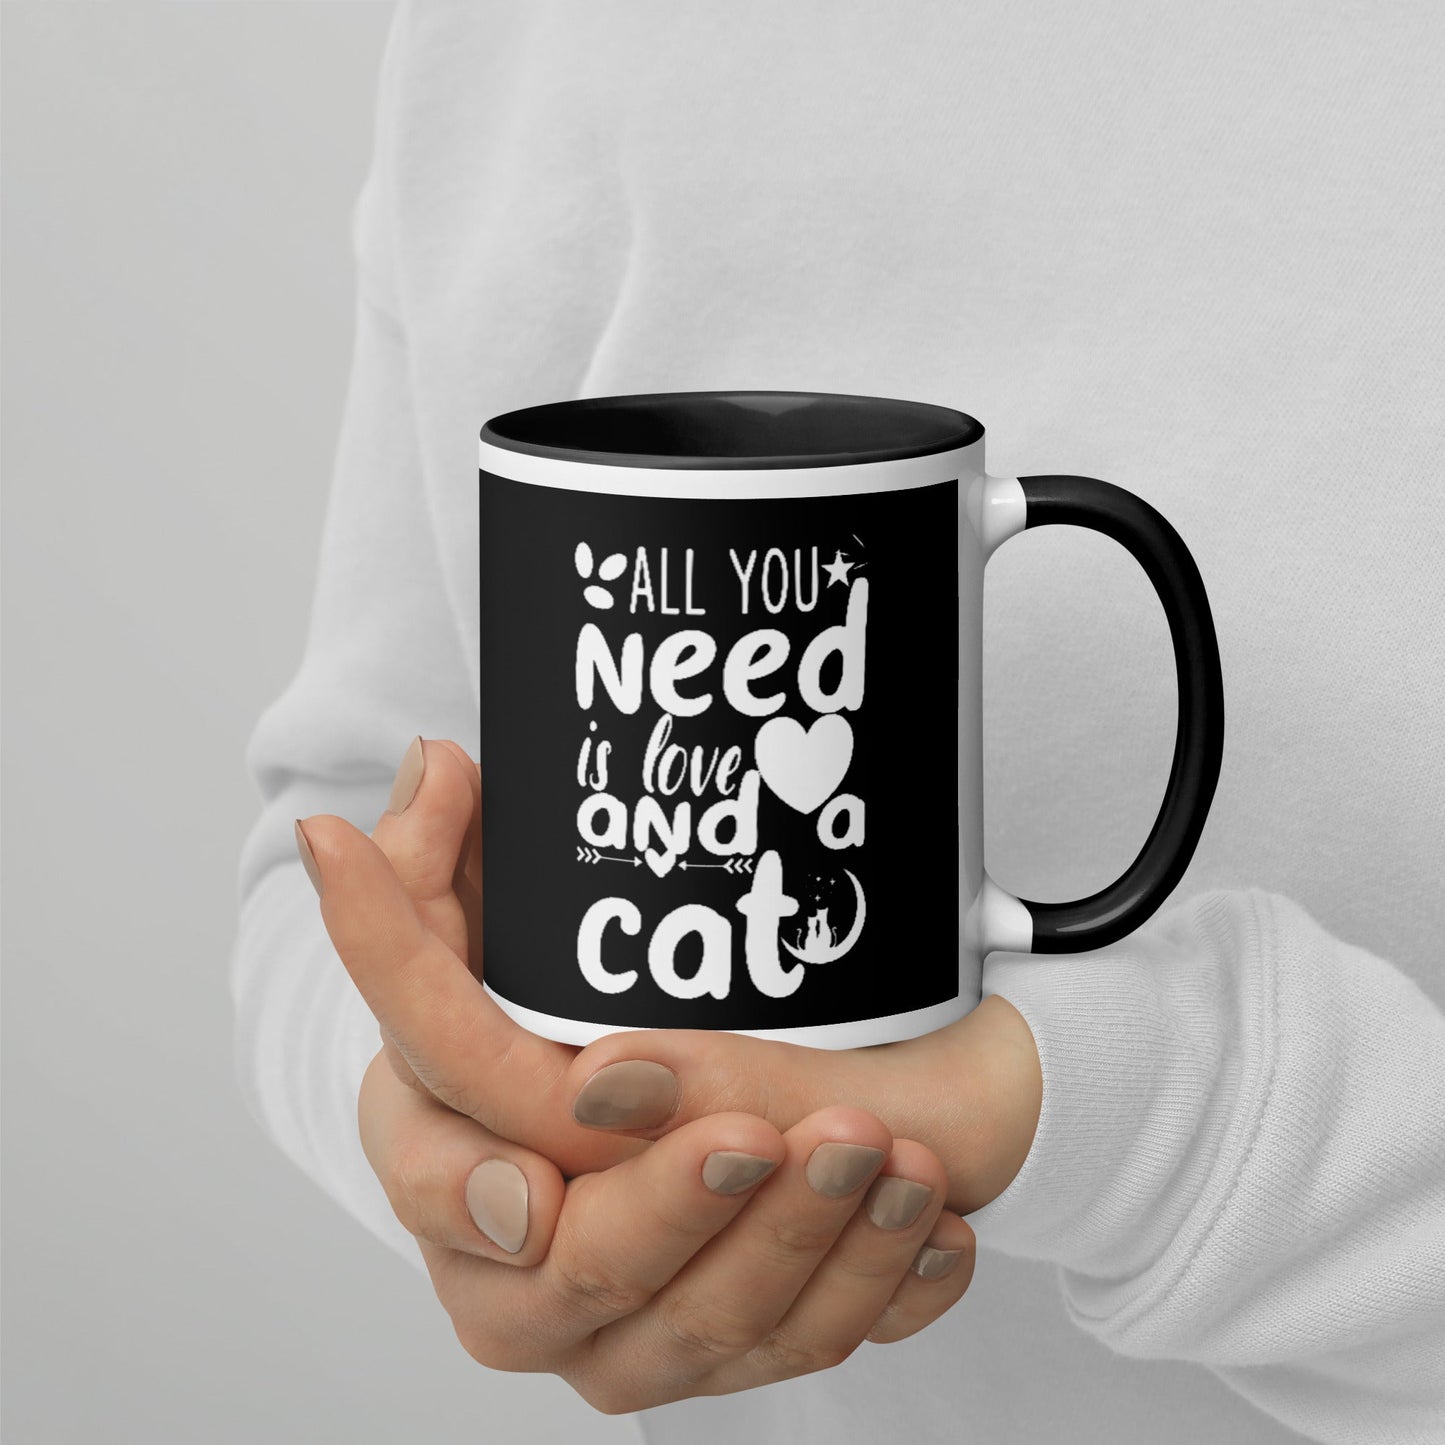 All you need is love and a cat – Tasse mit Aufdruck